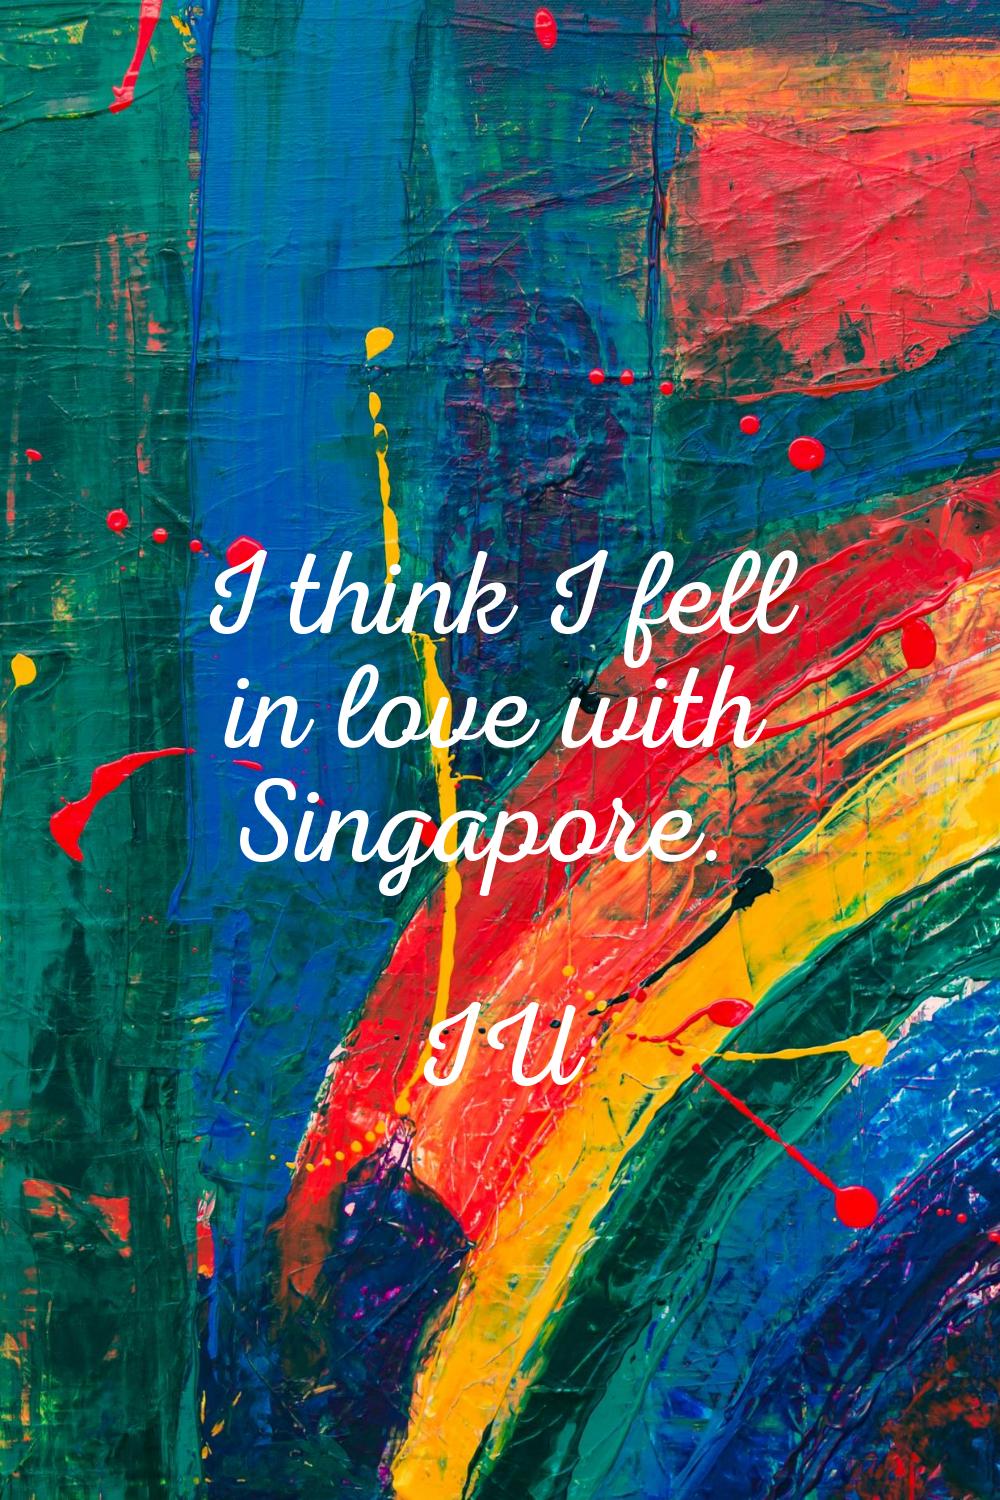 I think I fell in love with Singapore.